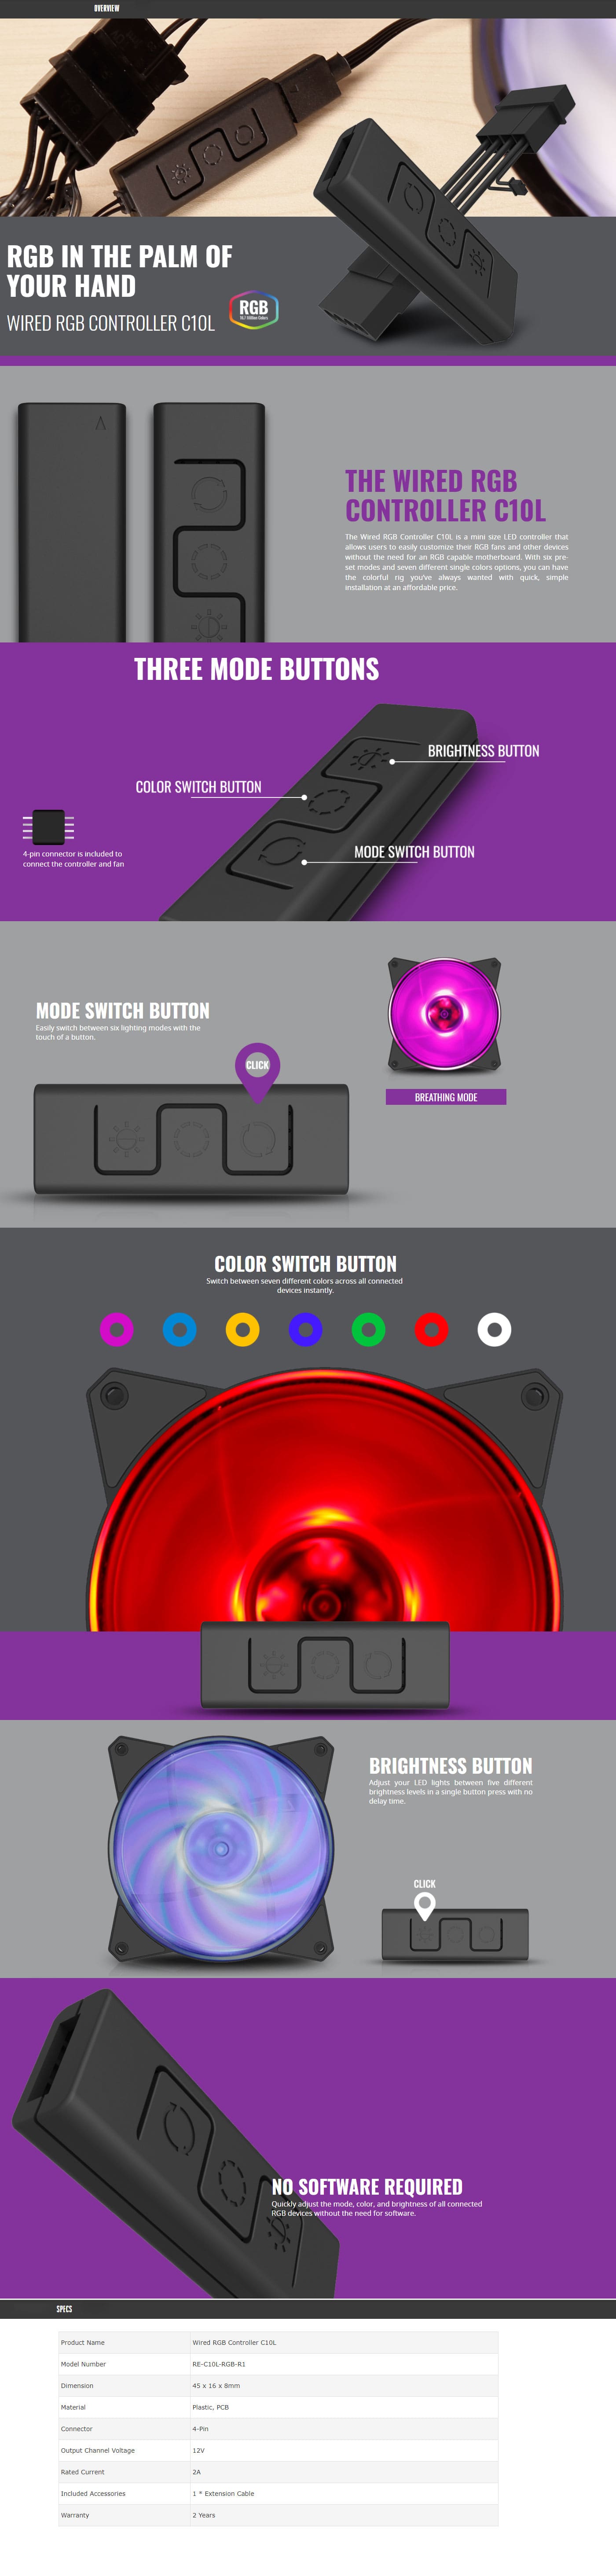 Cooler Master Wired RGB Controller features